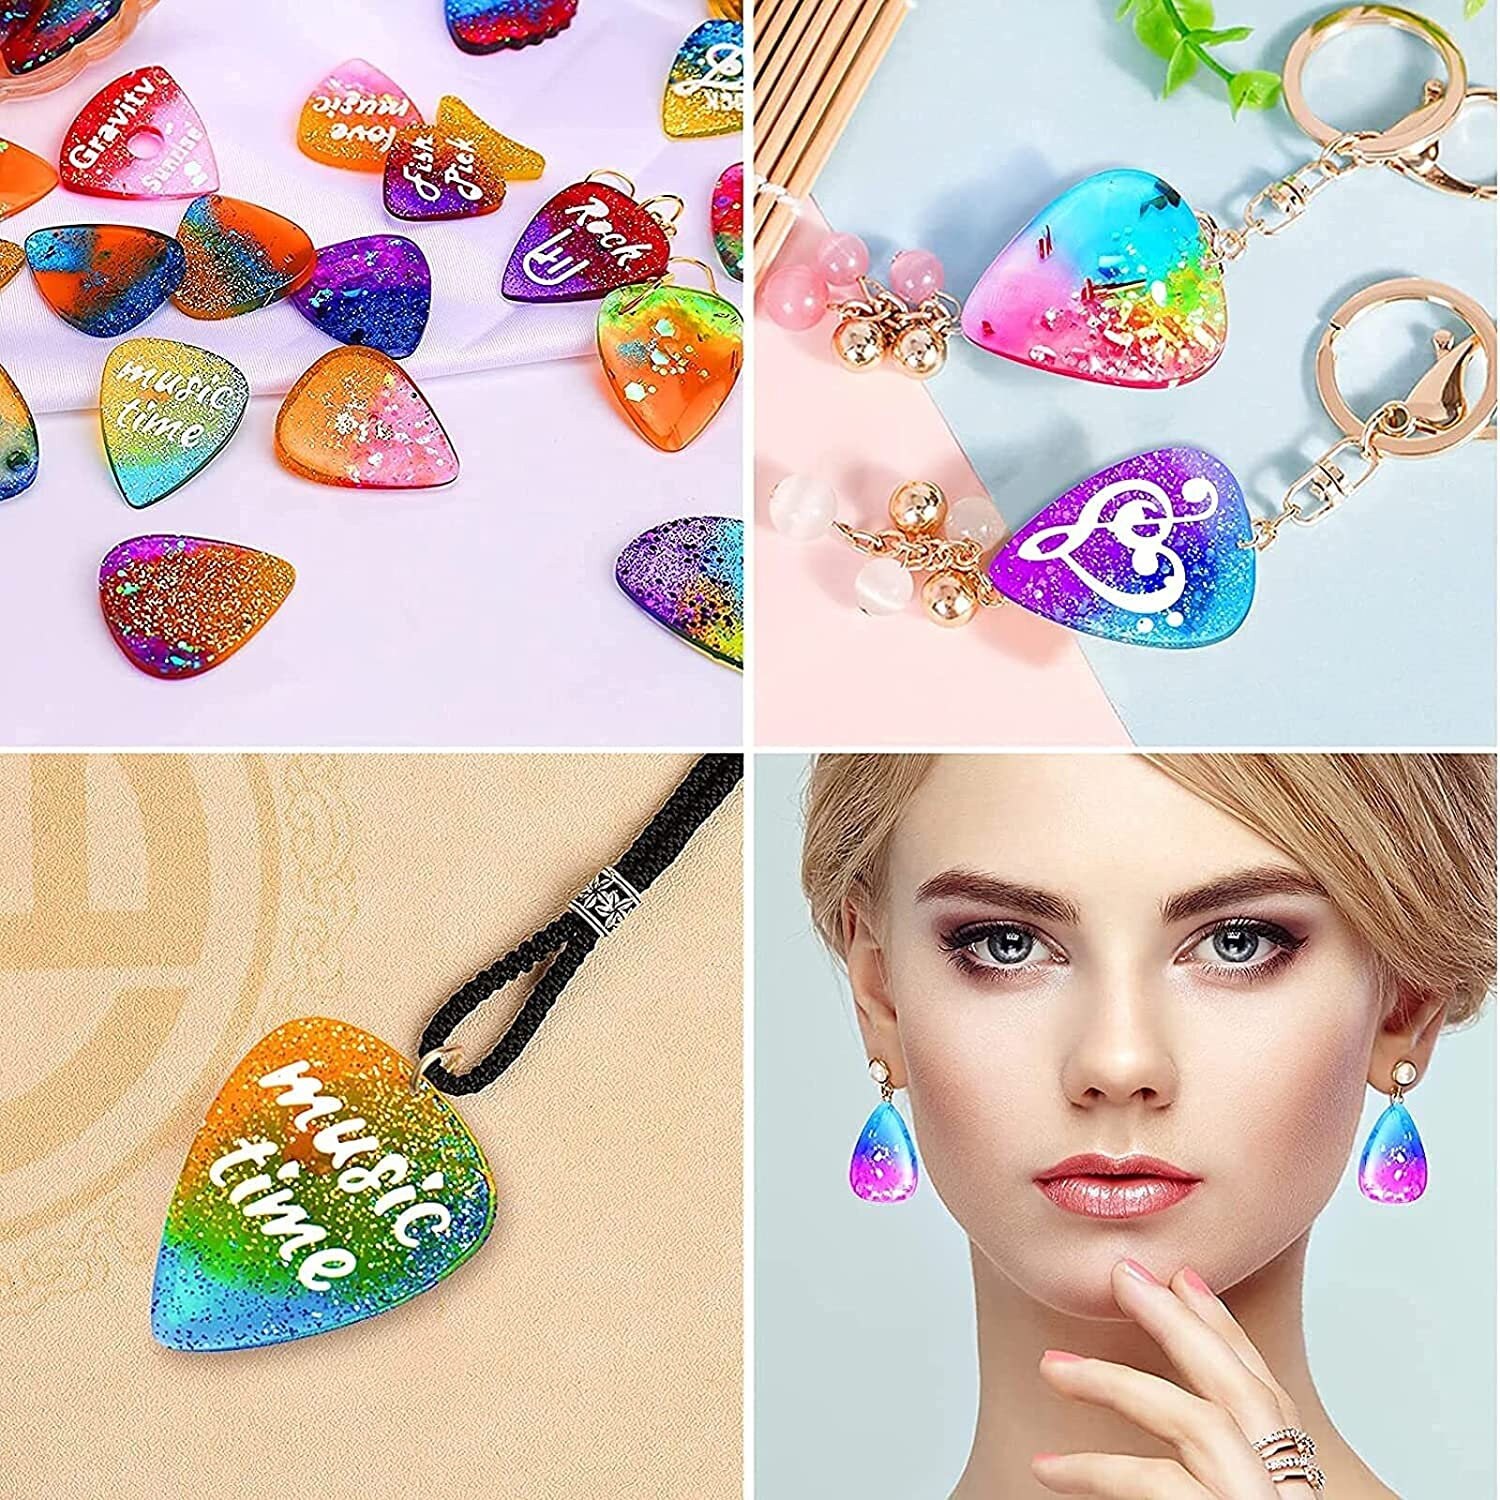 Resin Mold For Guitar Pick, Silicone Guitar Triangle Plectrum, Guitar Shape  Epoxy Molds For Resin Casting, Resin Keychain Molds For Musical Accessorie